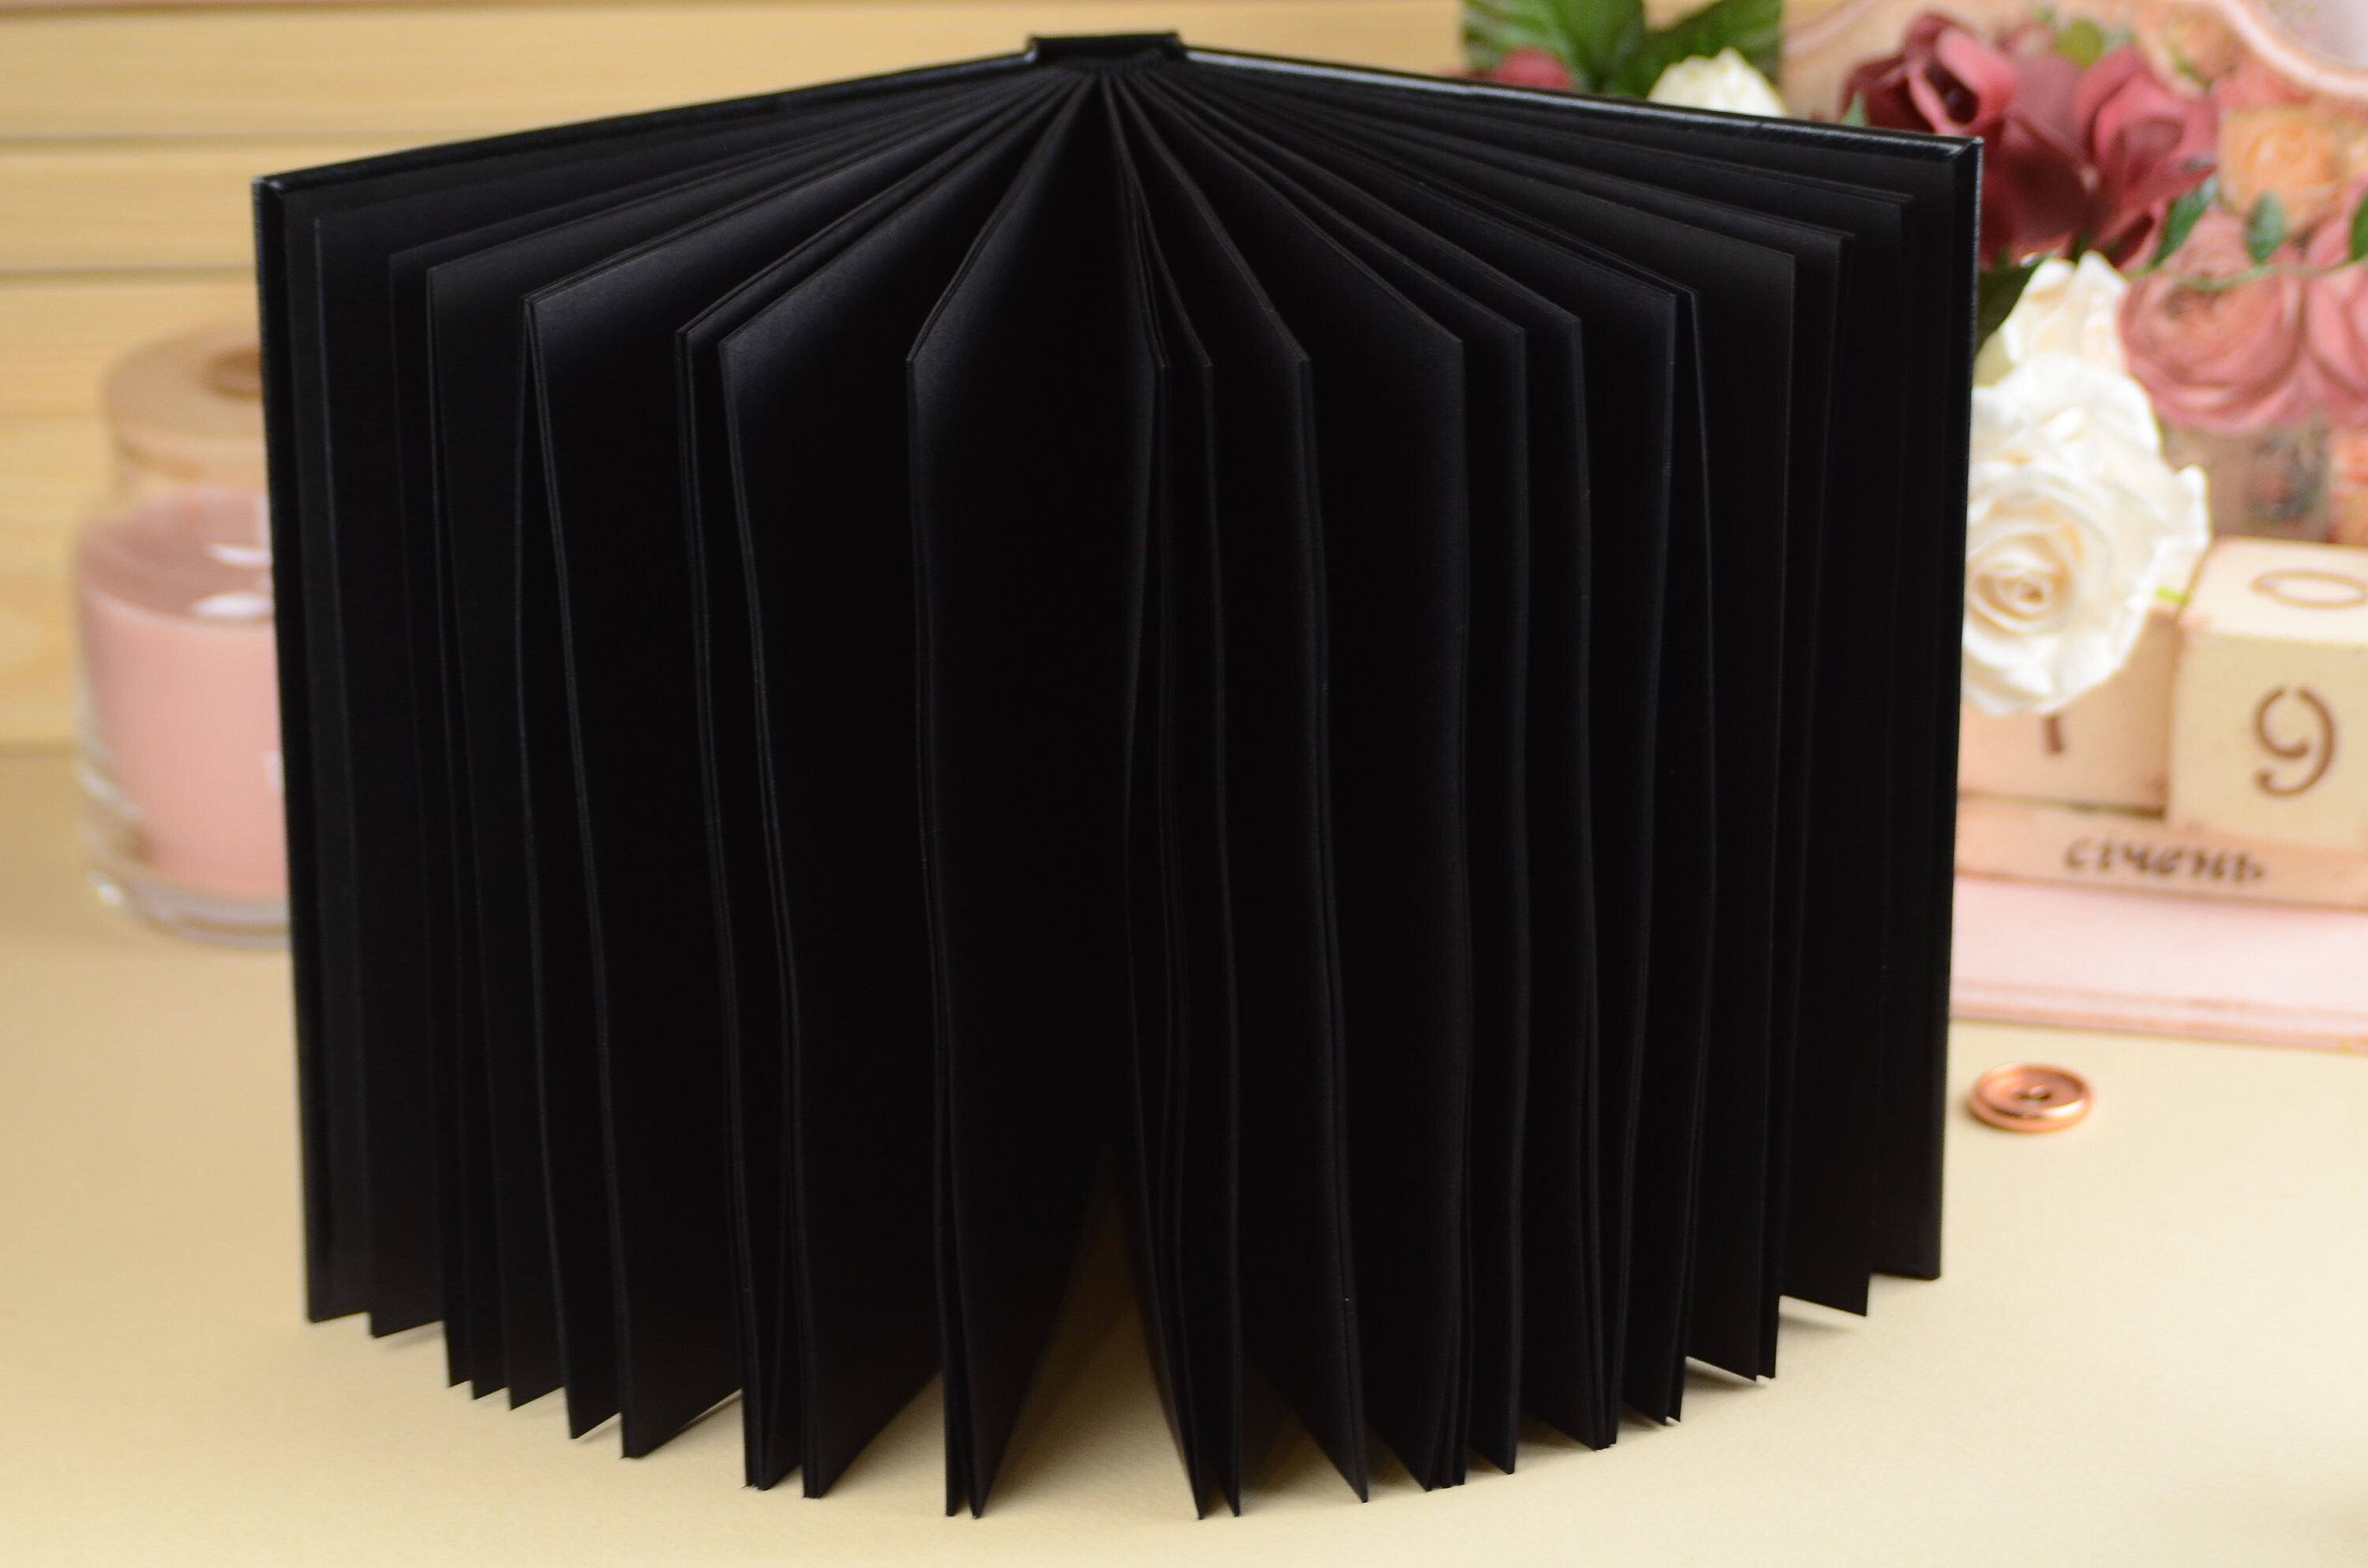 Black Pages Notebook with Black Cover, 256 Pages - Notebookpost